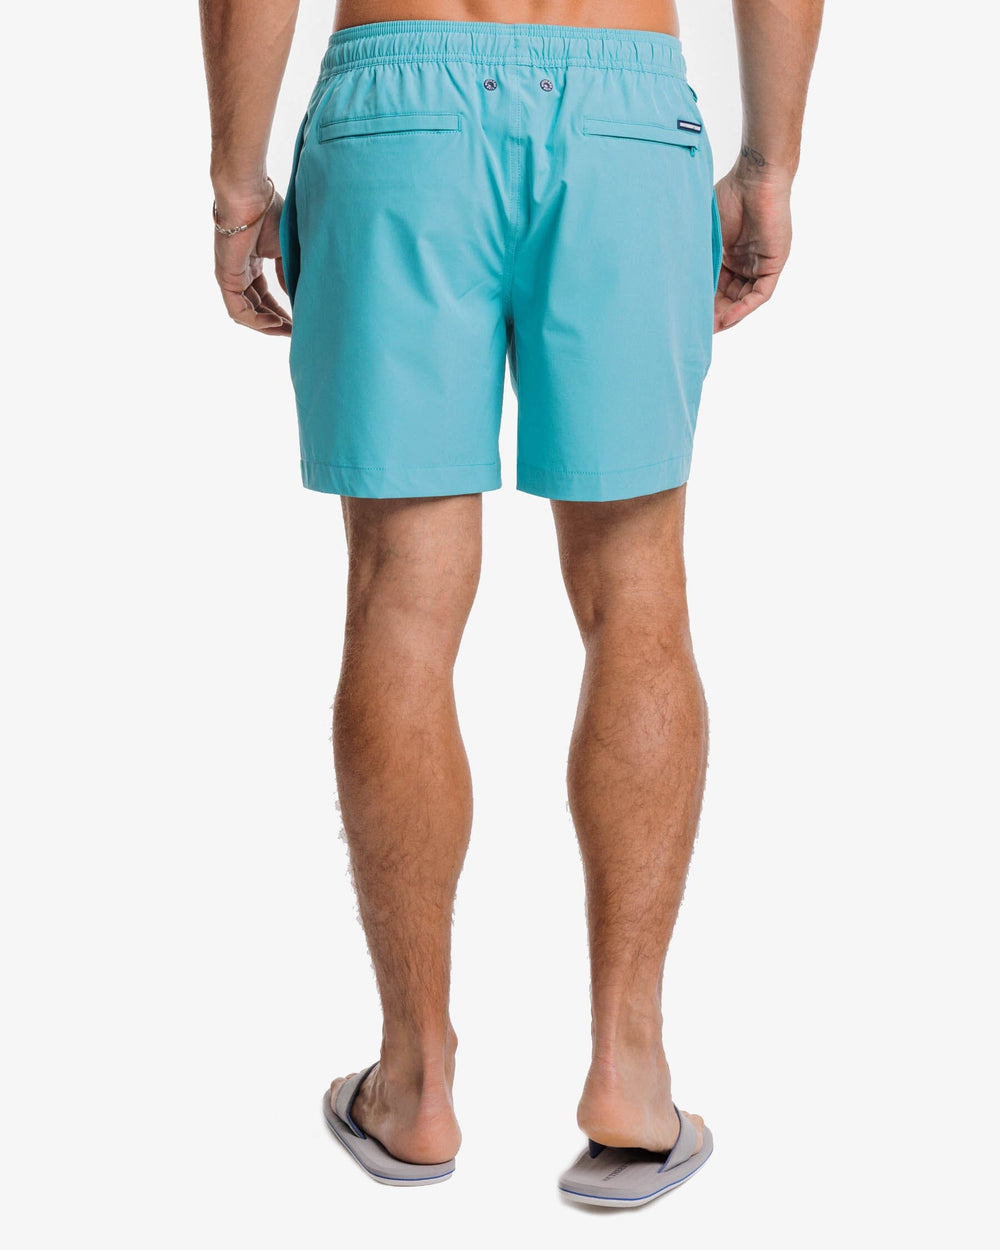 The back view of the Southern Tide Solid Swim Trunk 3 by Southern Tide - Tidal Wave